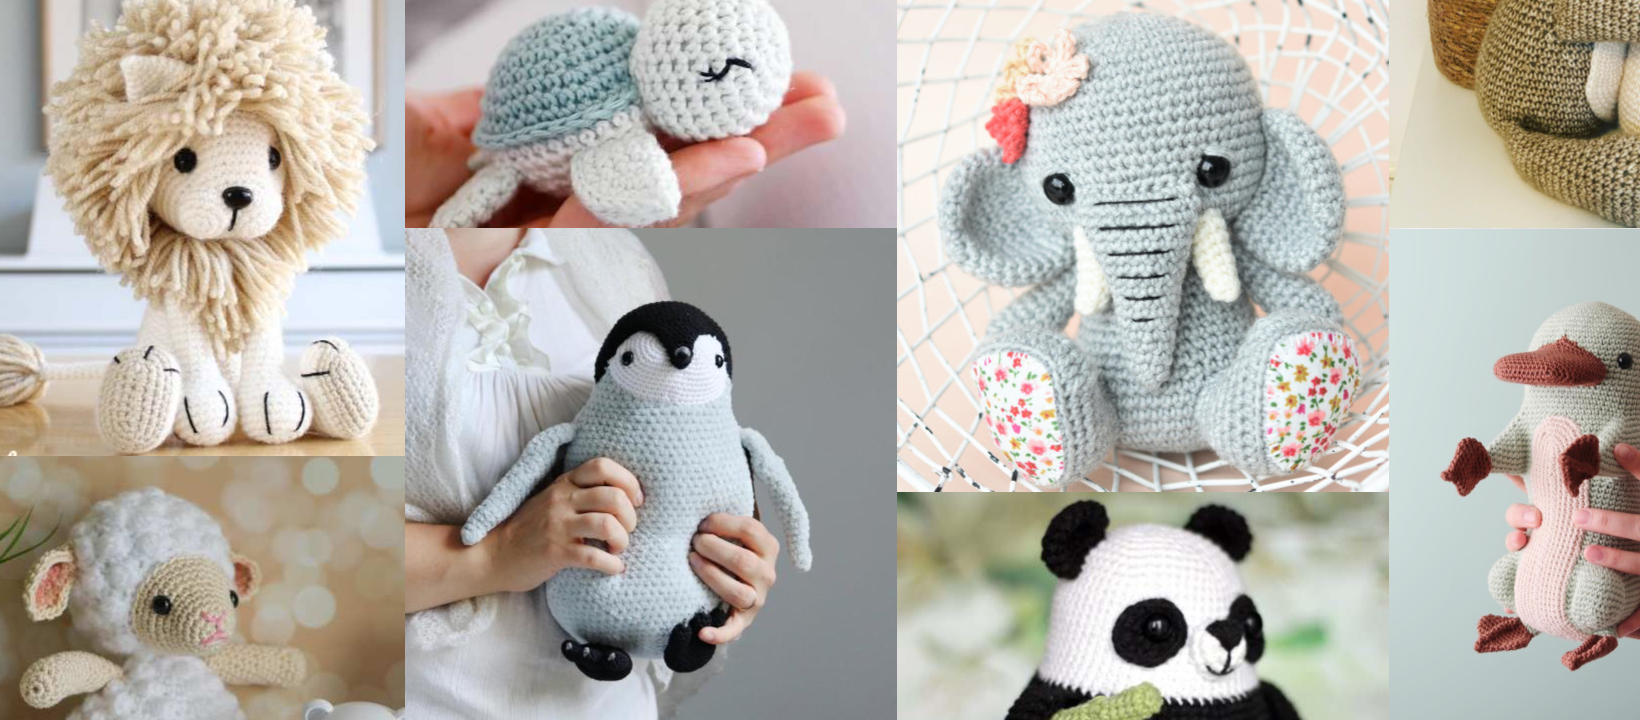 What Happens When Someone Crochets Stuffed Animals Using